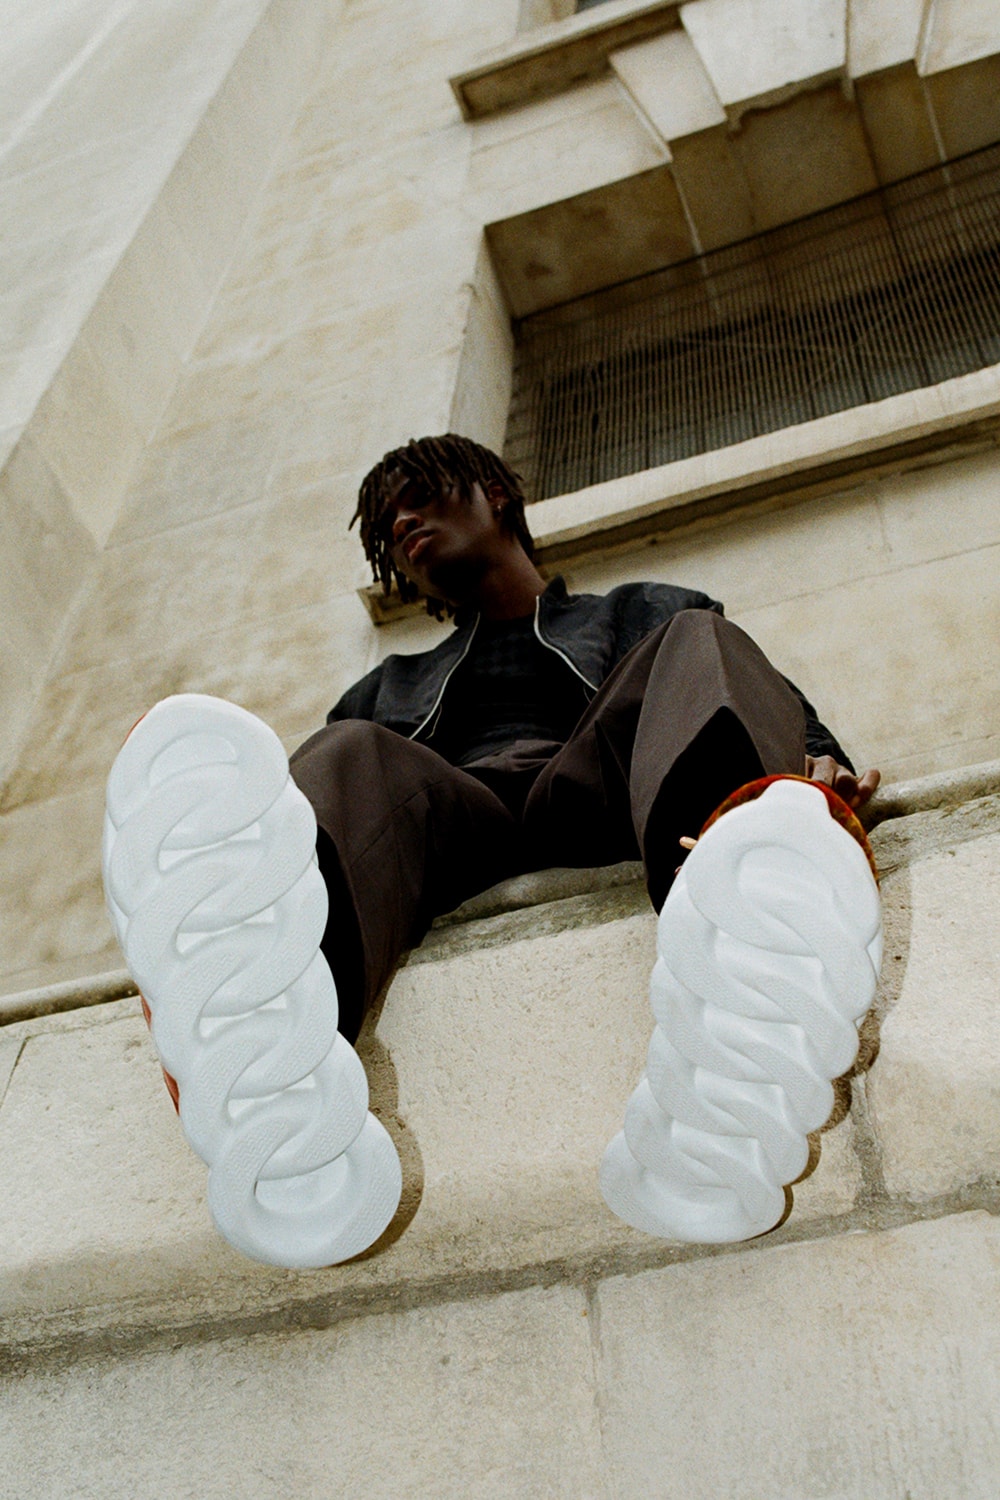 Versace Chain Reaction Sneaker Fall/Winter 2018 Collection Editorial London - NEEDS MORE KEYWORDS